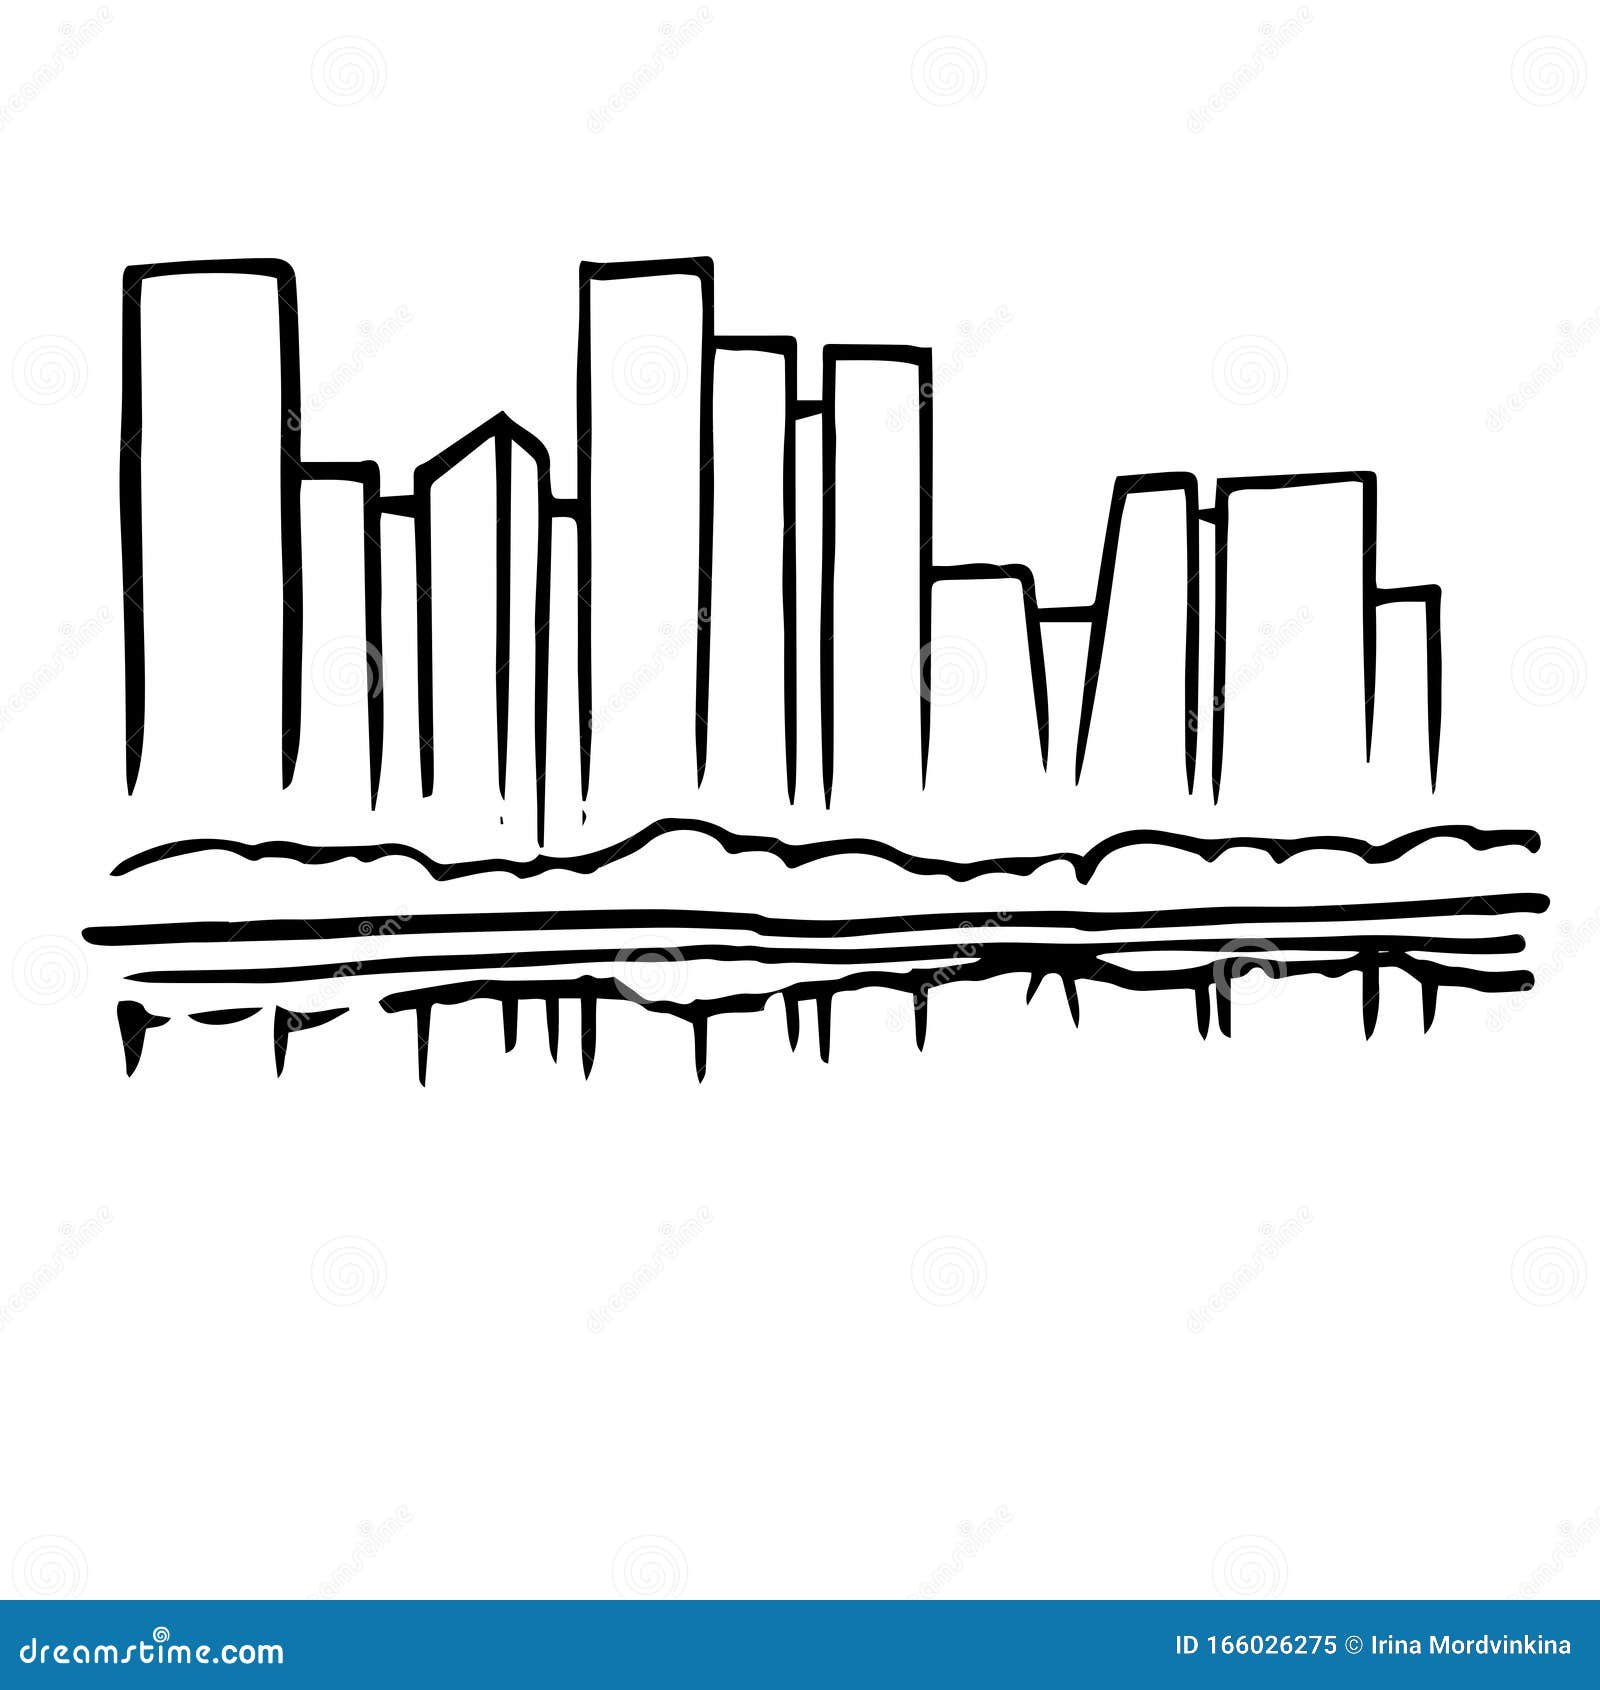 Easy City Coloring Page Images - Free Download on Freepik